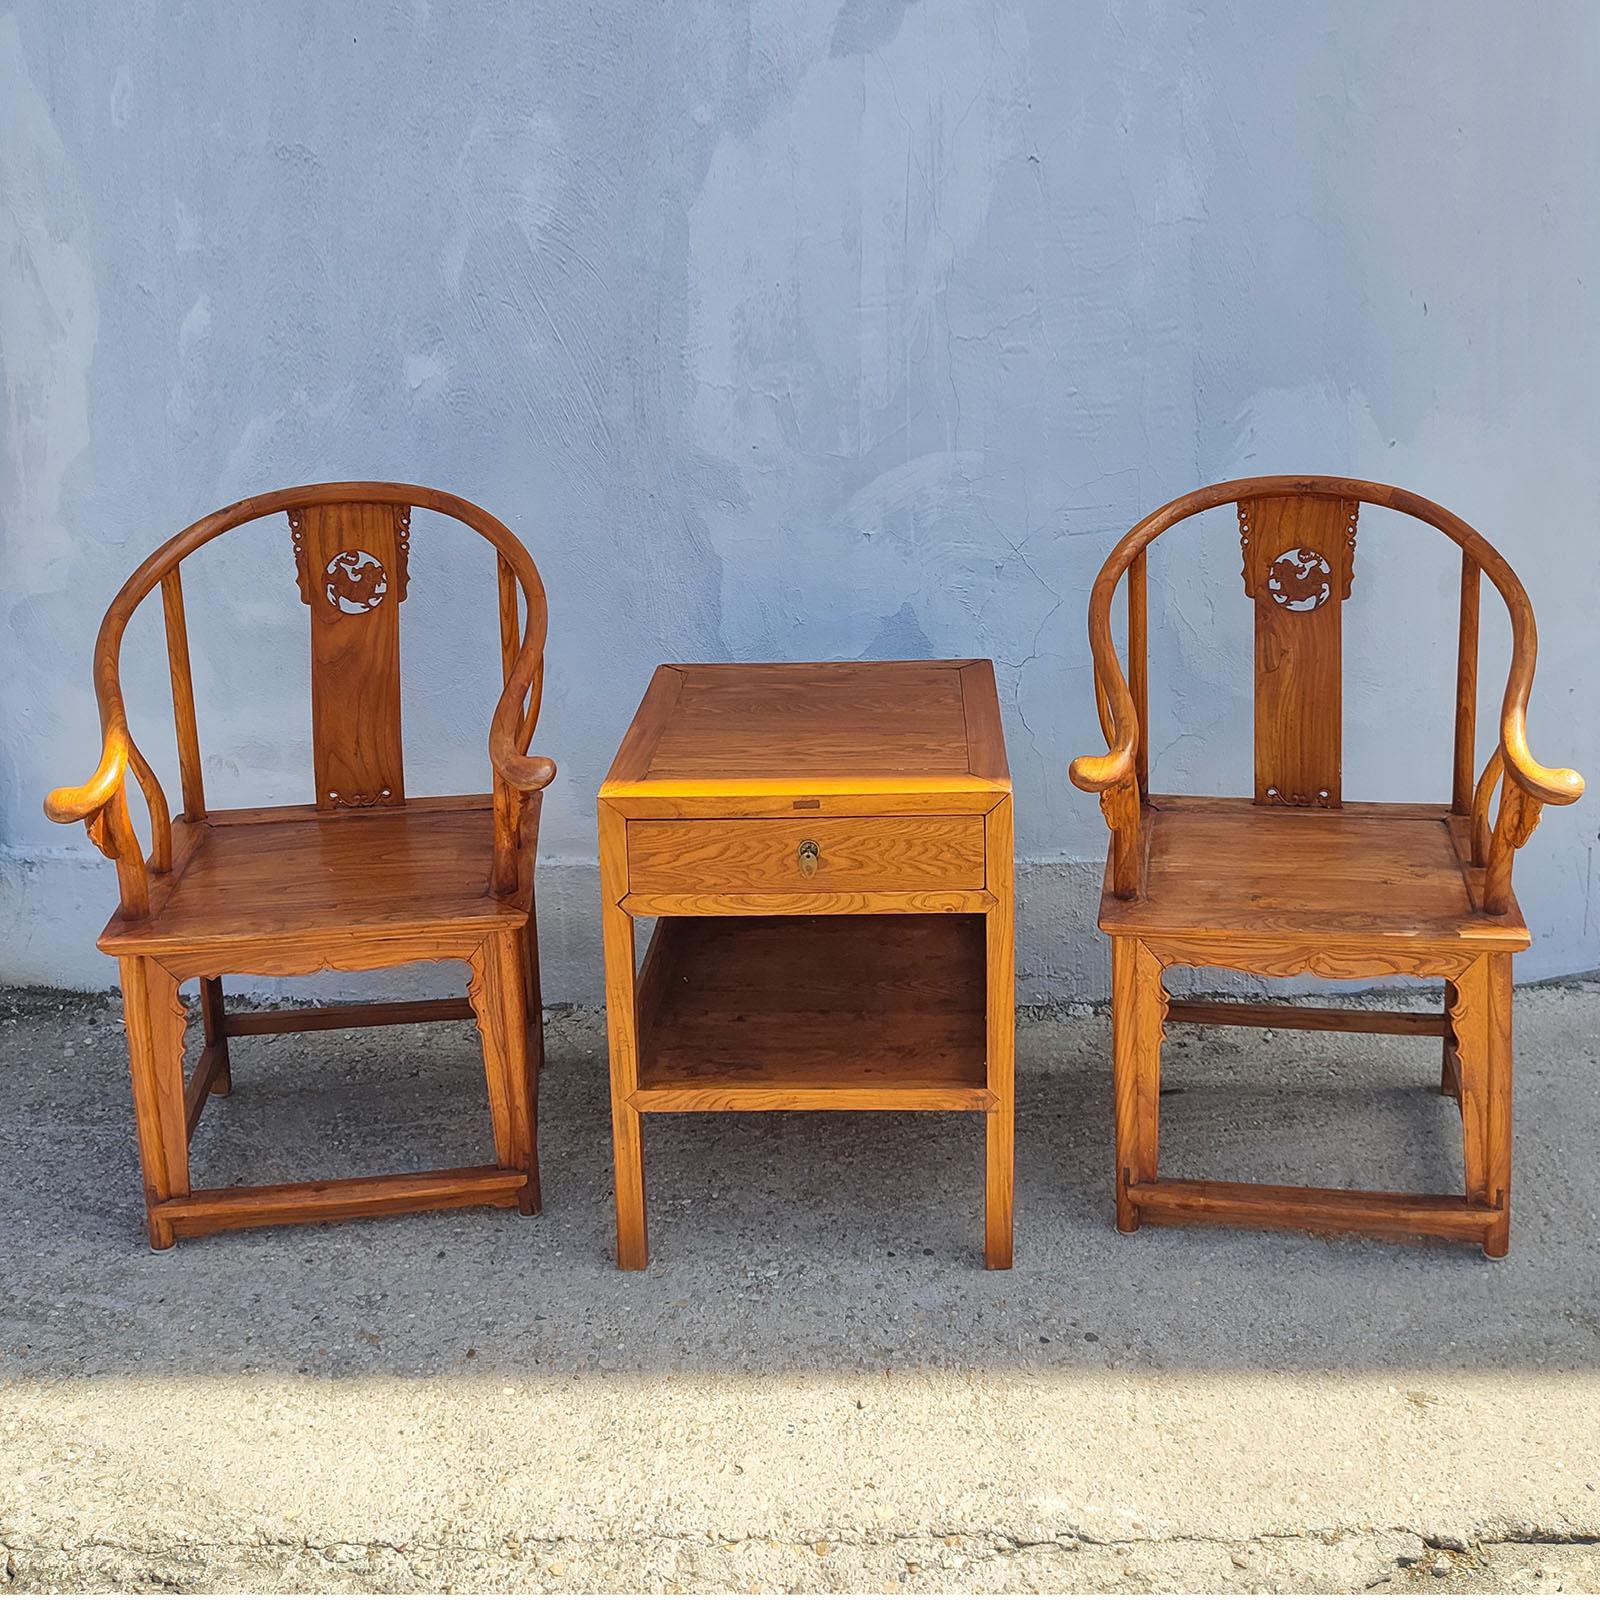 Vintage Chinese Ming Style Natural Wood Horseshoe Pair of Armchairs and Table.
Dimensions: 
Armchairs 68x68x107cm
Table 60x60x74cm
Good overall condition, normal wear according to their age.

A pair of wood horseshoe back armchairs from the